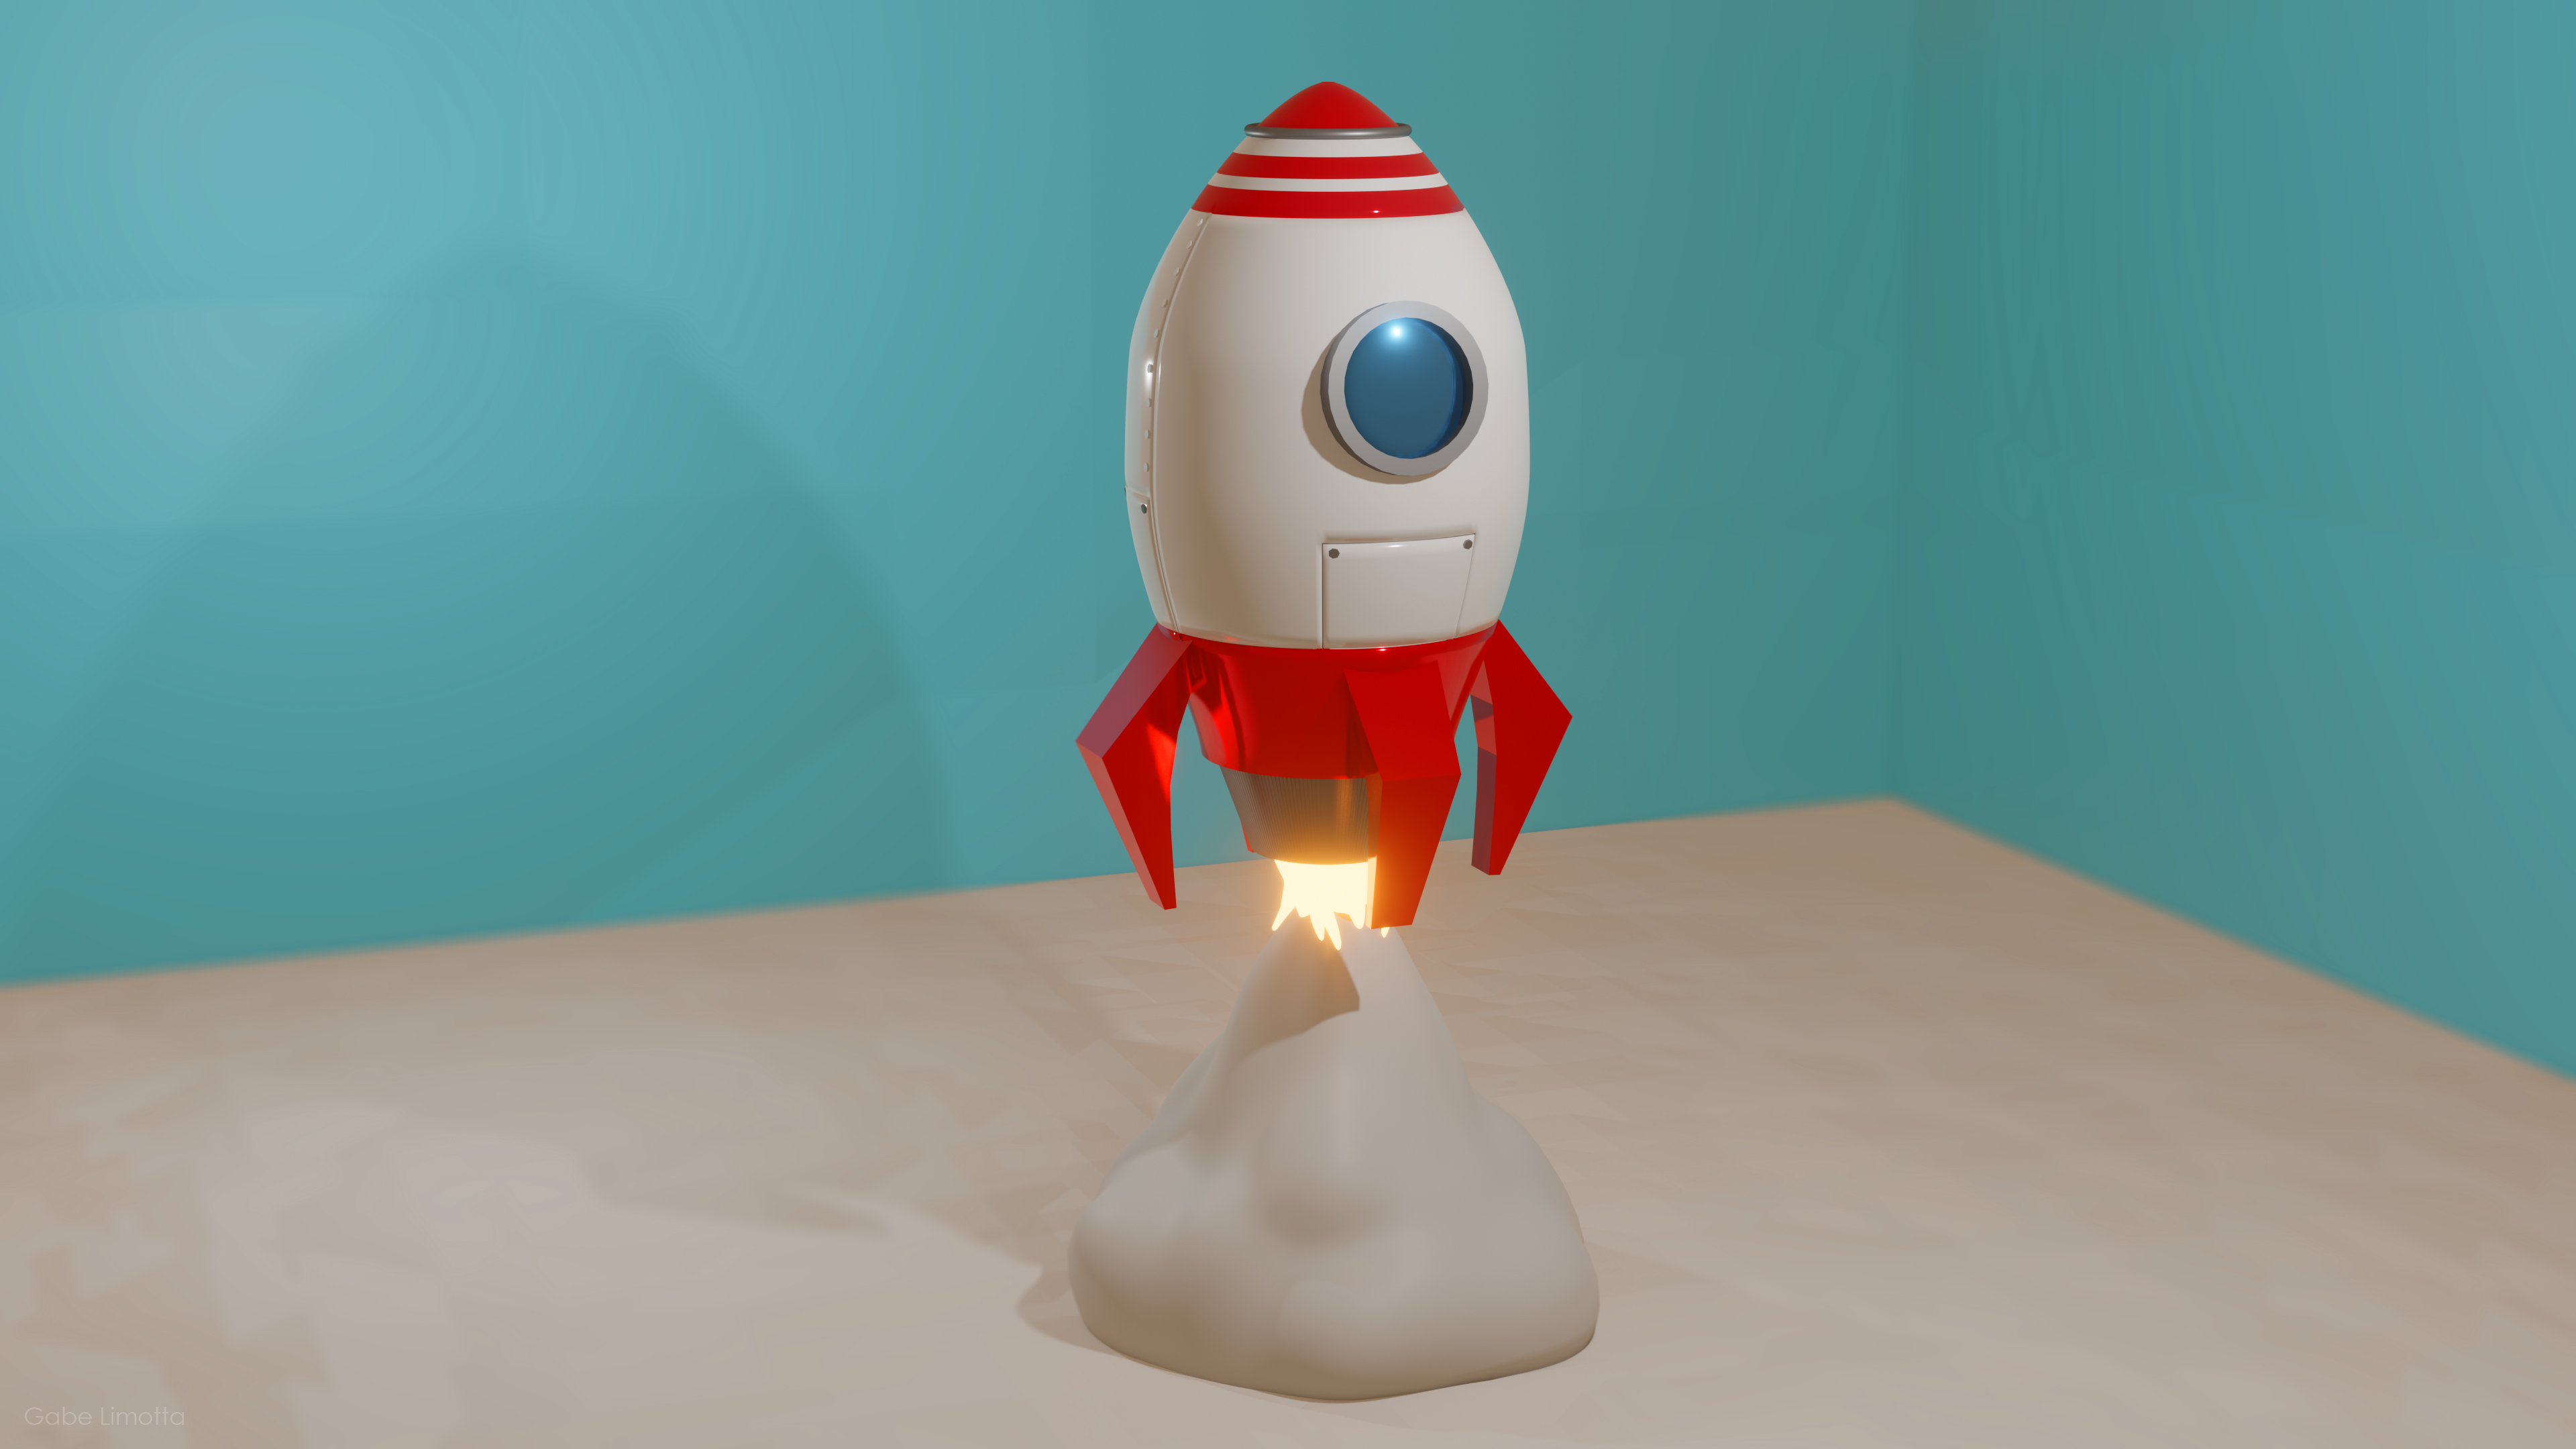 Toy Rocket - Finished Projects - Blender Artists Community